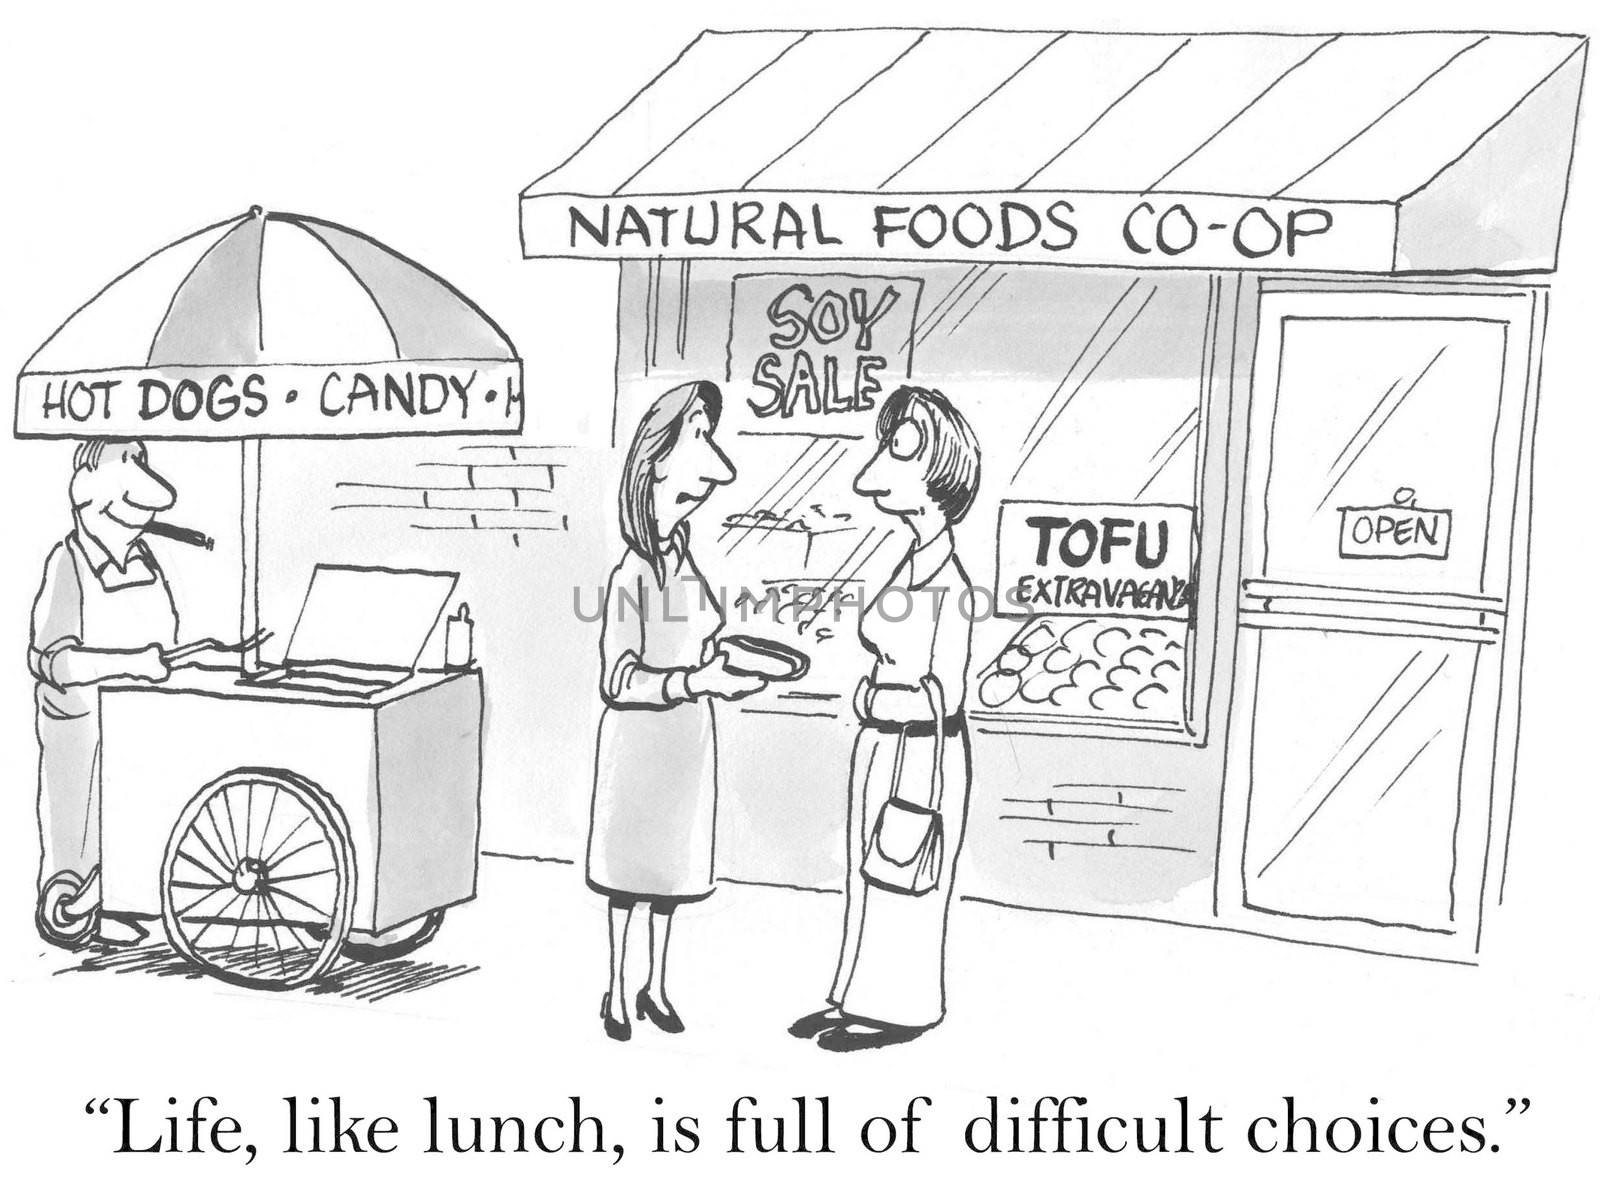 "Life, like lunch, is full of difficult choices."